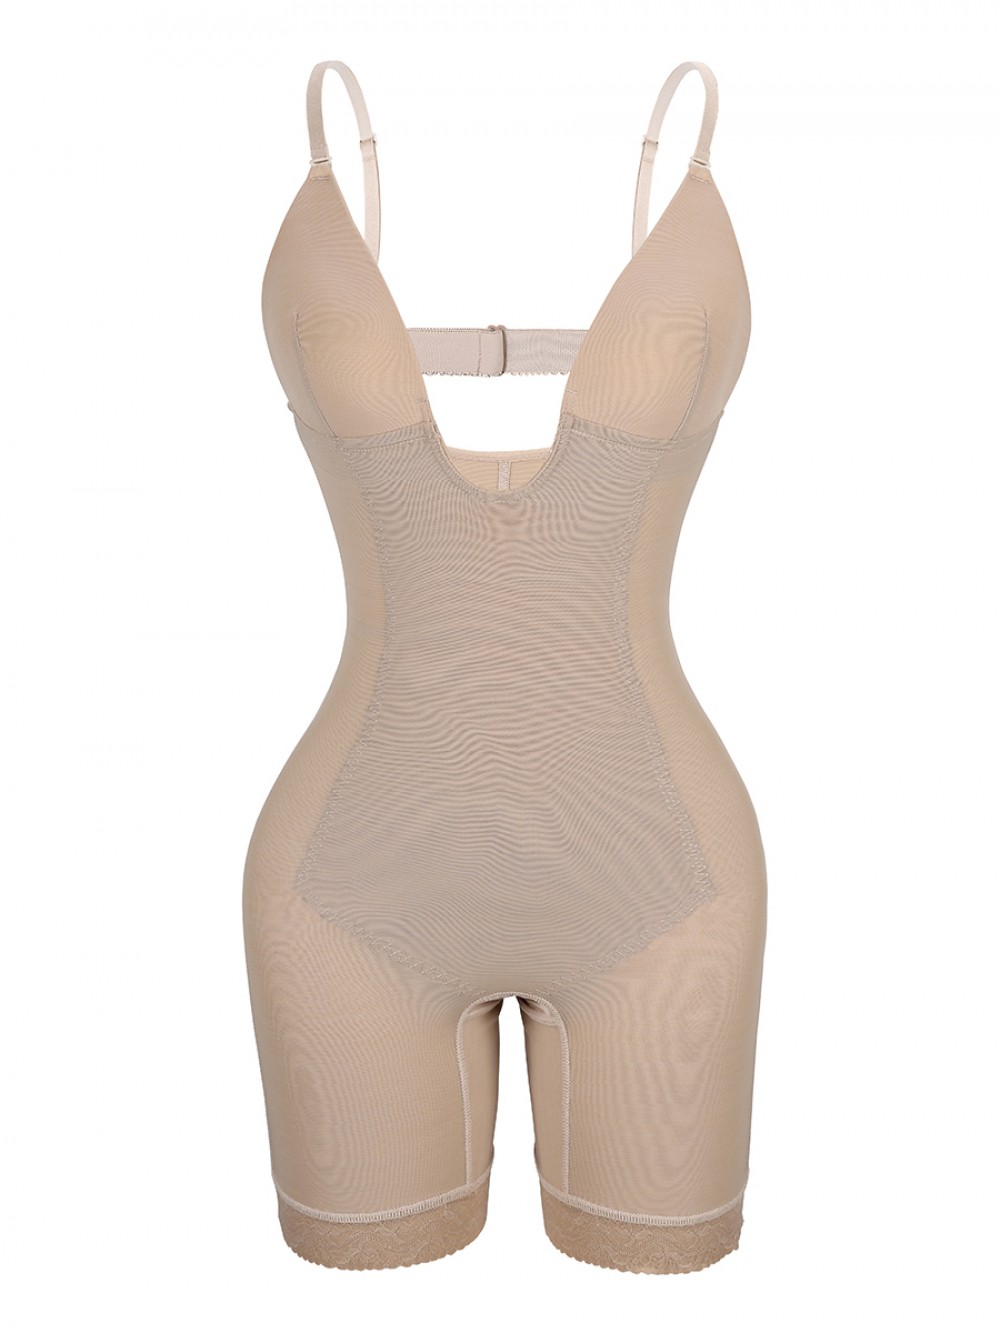 Skin Color Low Back Open Crotch Lace Body Shaper Workout